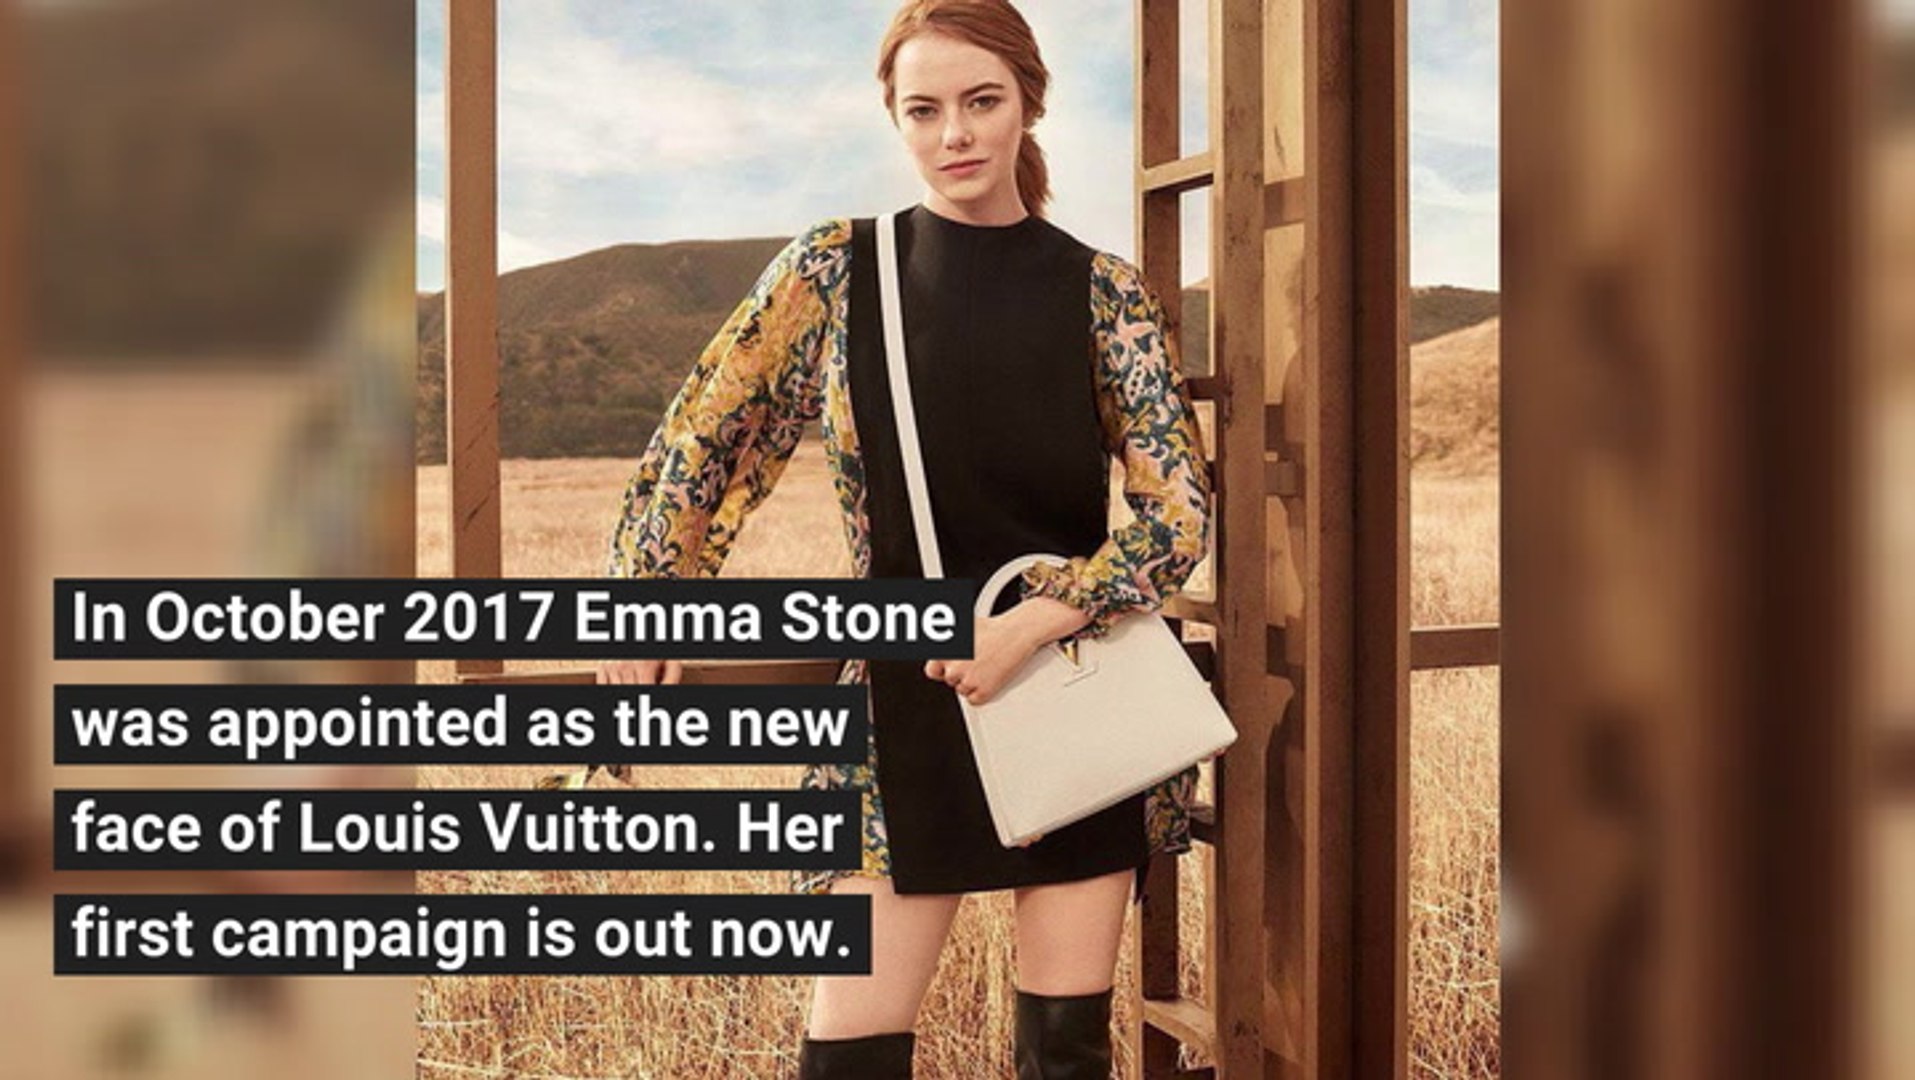 With Emma Stone inside the second video ad campaign for Louis